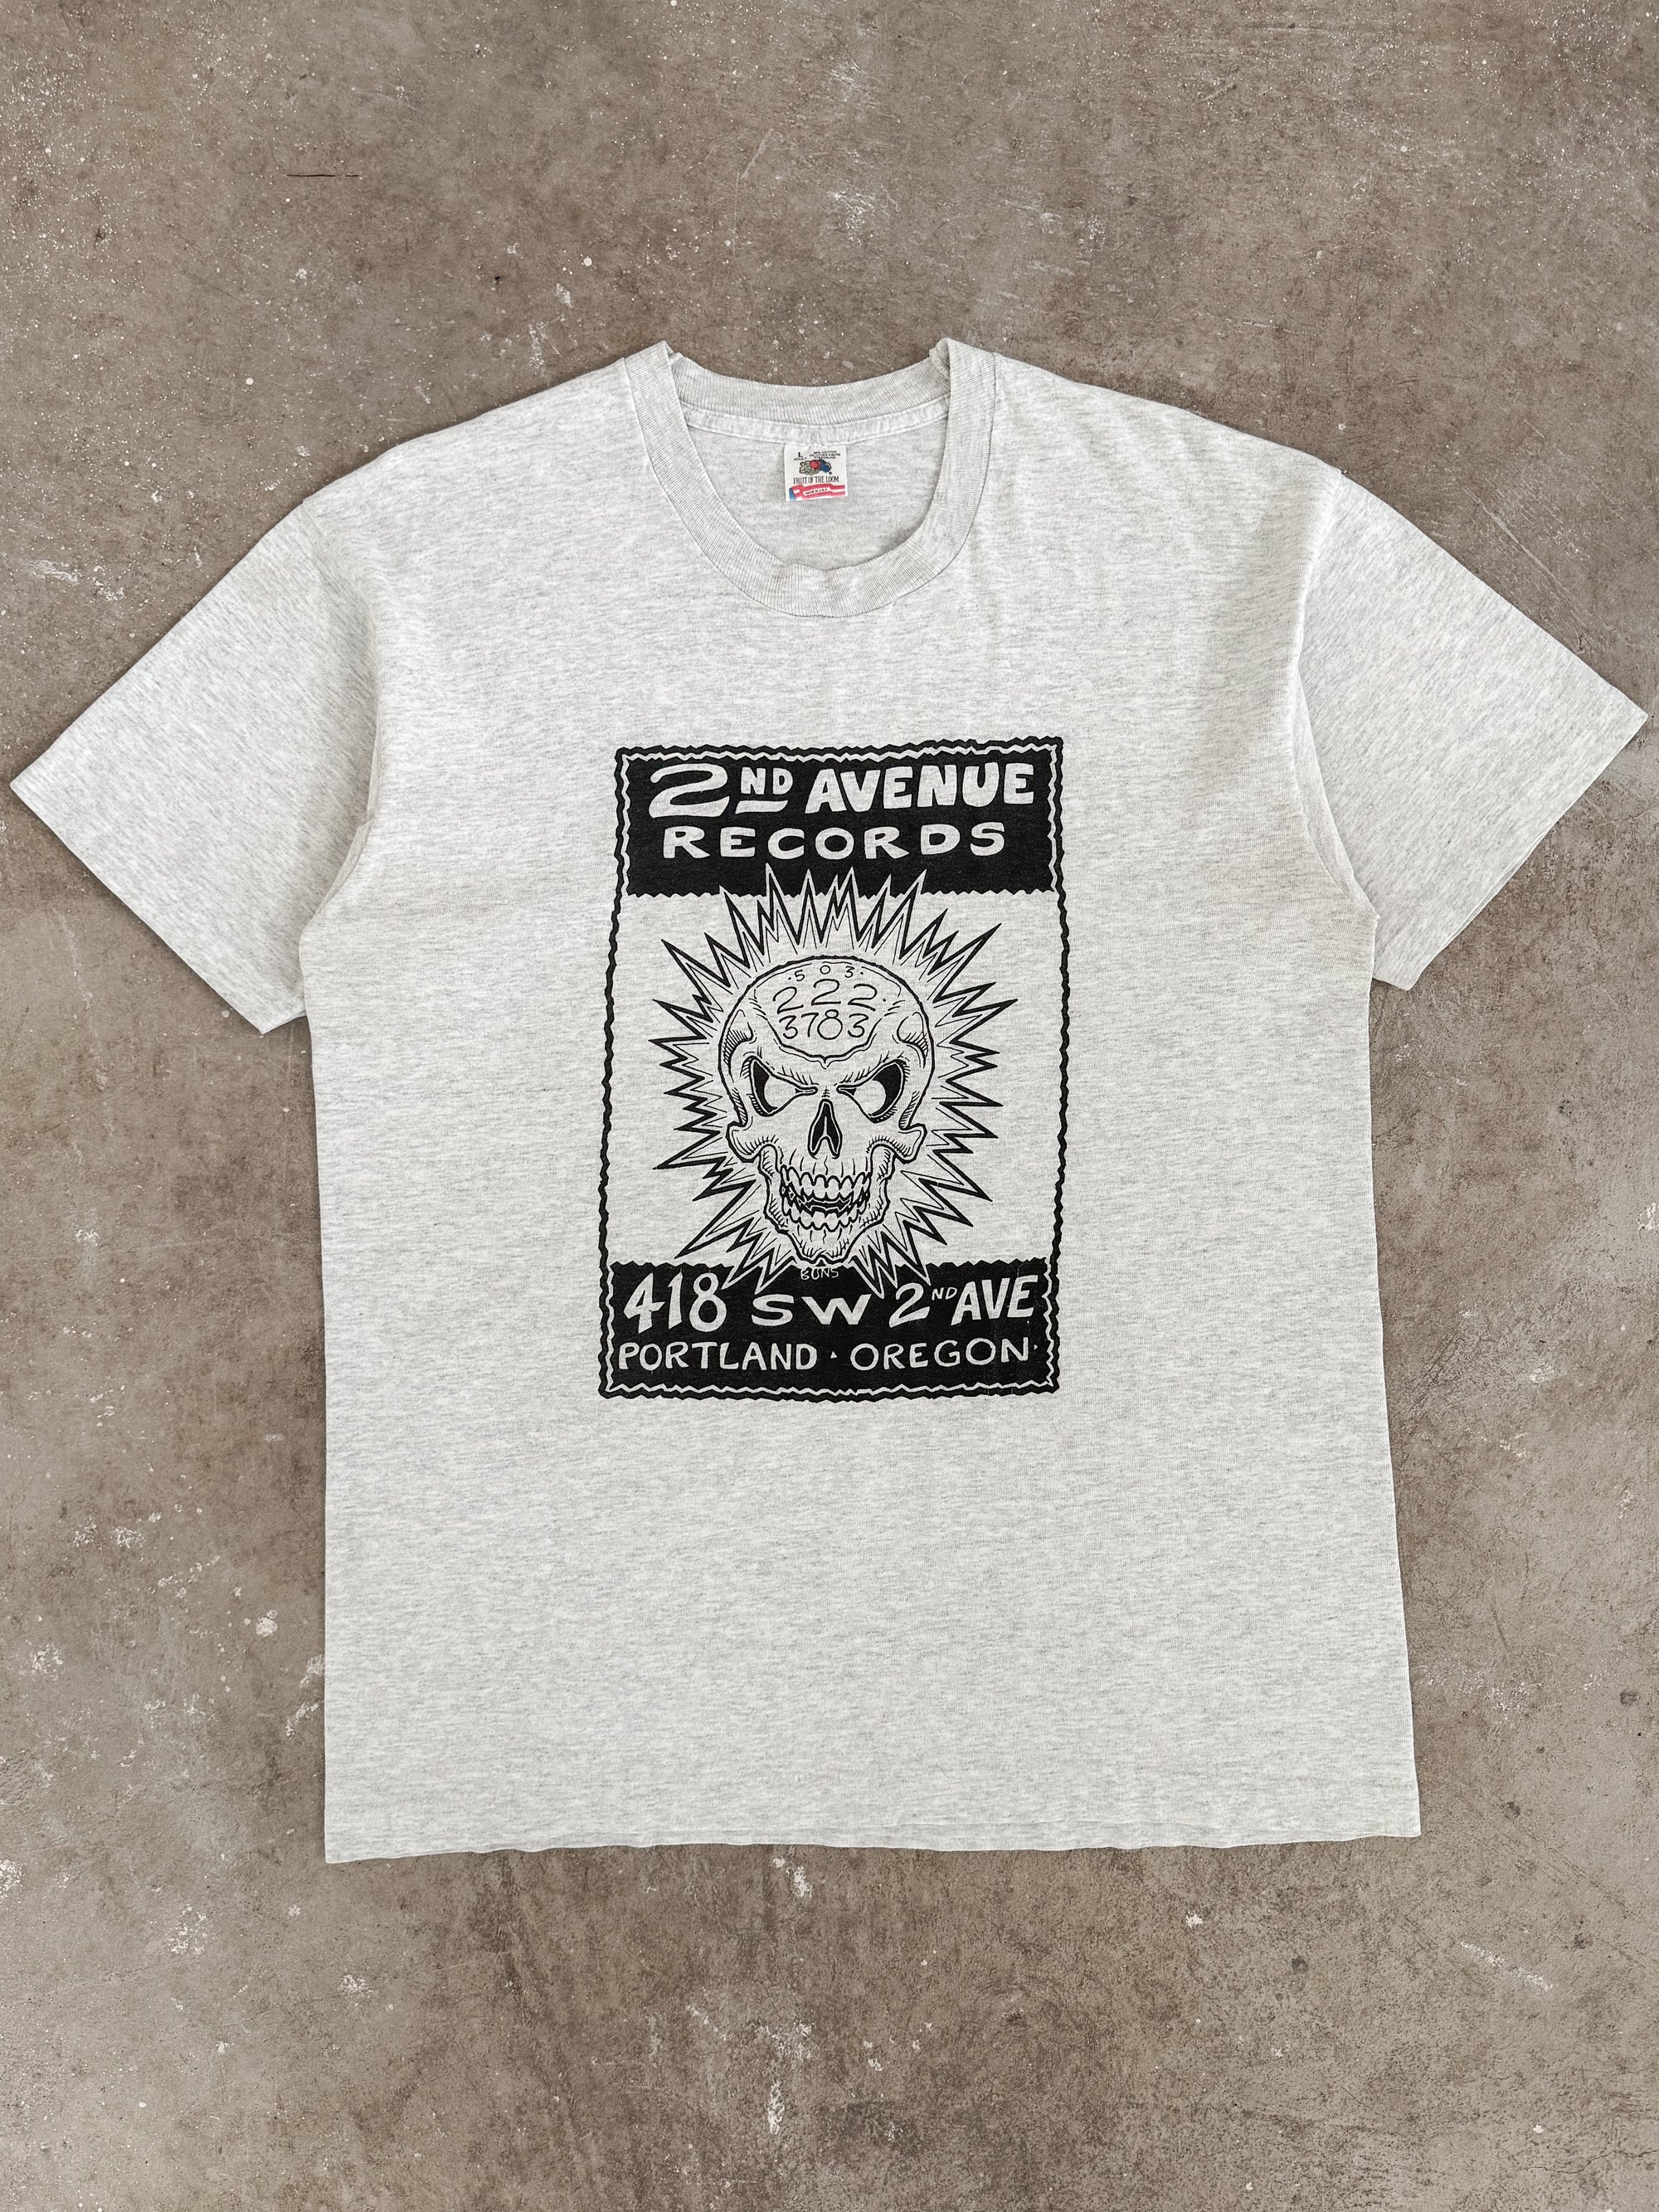 1990s "2nd Avenue Records" Tee (L)